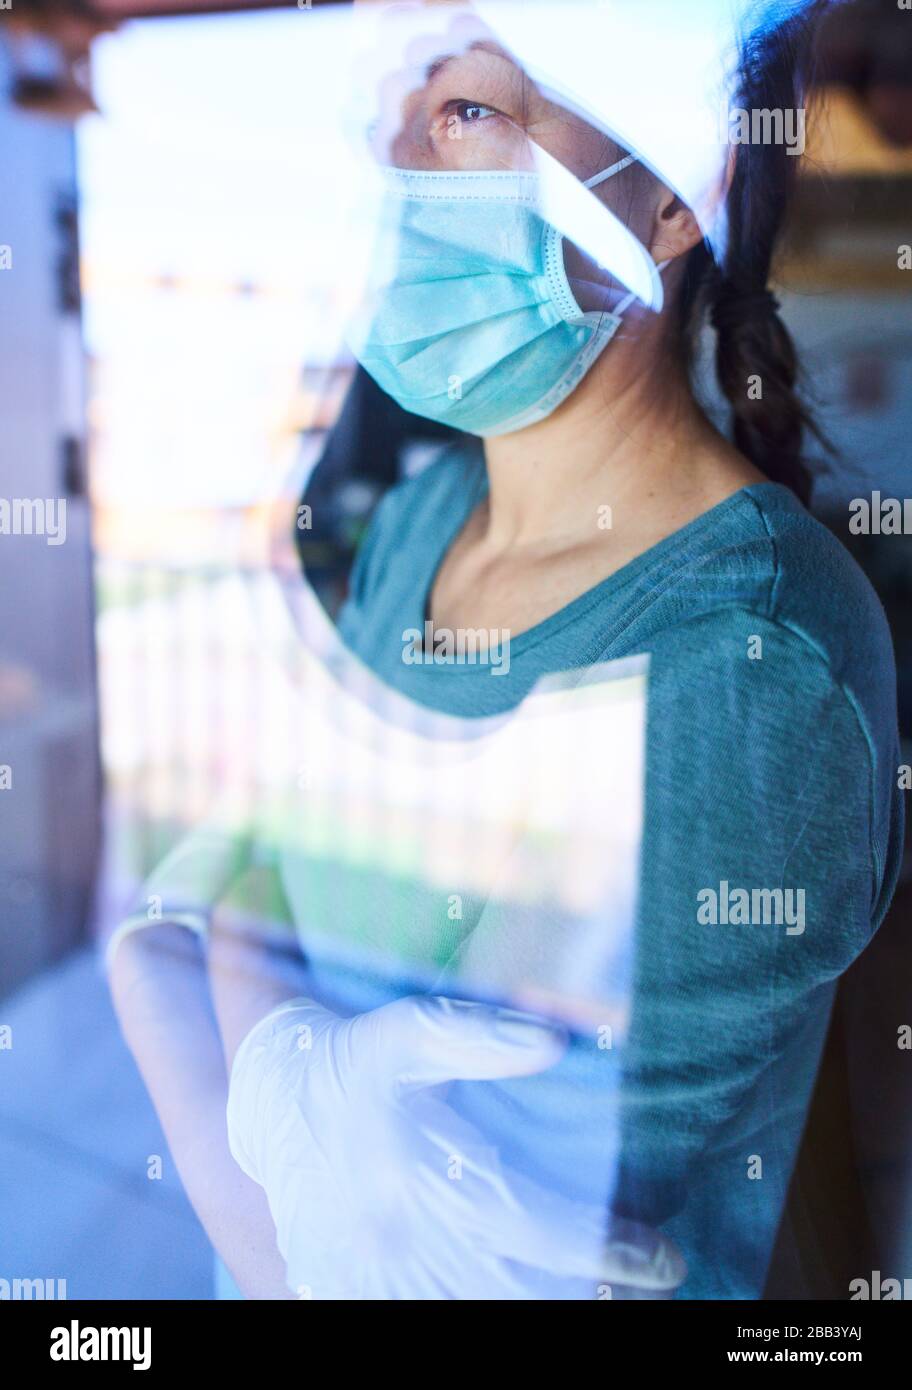 Pfaffenhofen, Germany, March 30, 2020. Caregiver and nurses are bad paid in the health system despite they work hard the Corona virus disease (COVID-19) on March 30, 2020 in Pfaffenhofen, Germany  MODEL RELEASED © Peter Schatz / Alamy Live News Stock Photo